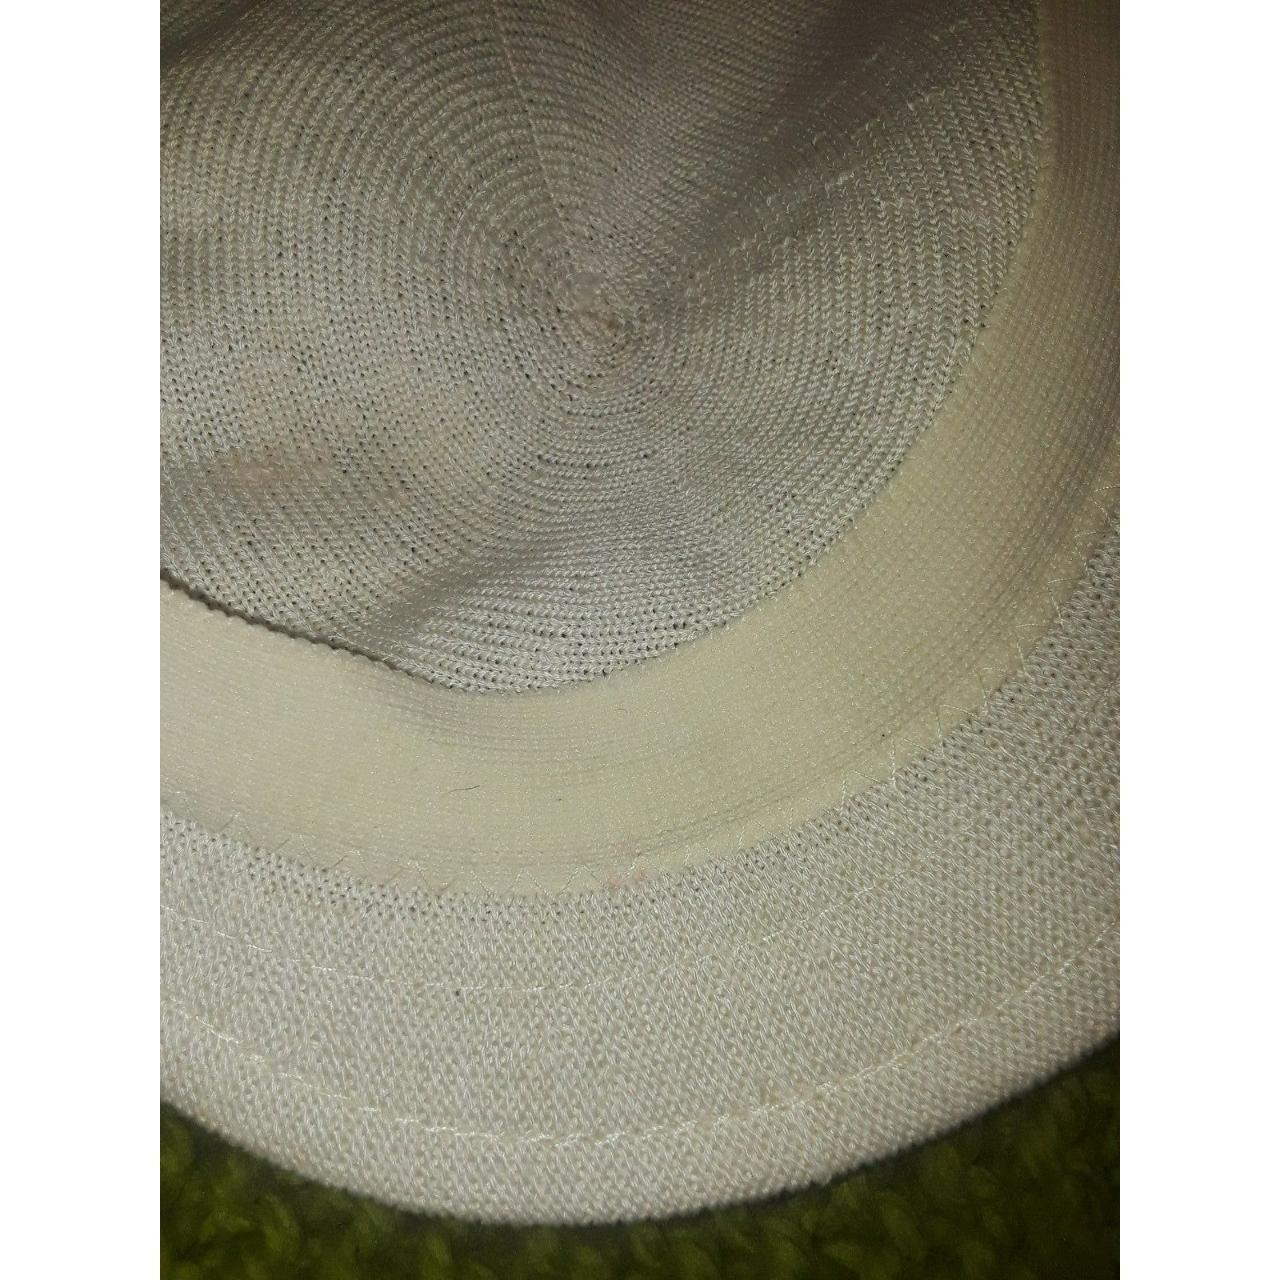 A few very faint discoloration, overall excellent... - Depop